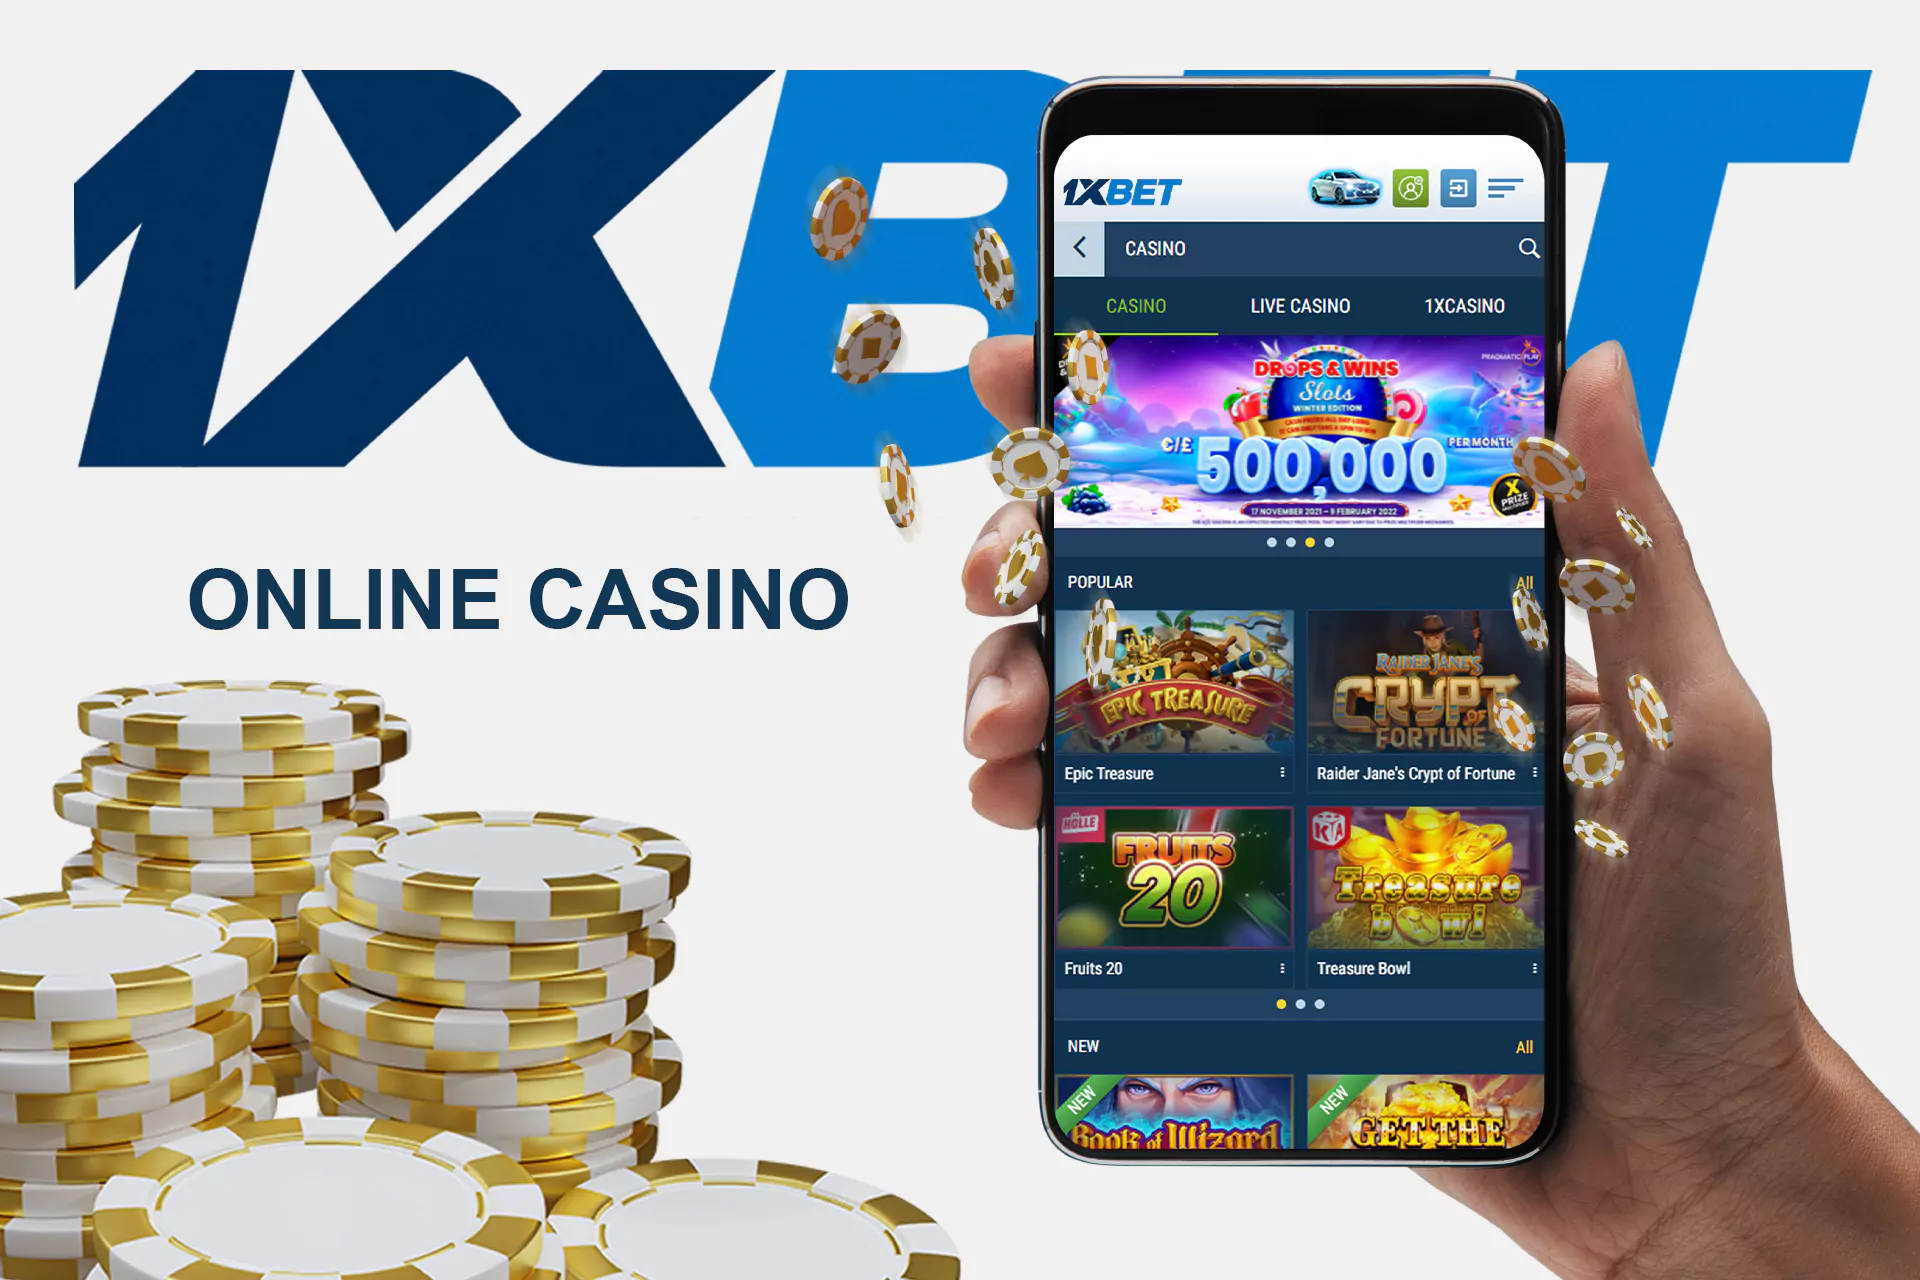 If you love slots and table games, you should definitely try the 1xBet Casino and Live Casino.